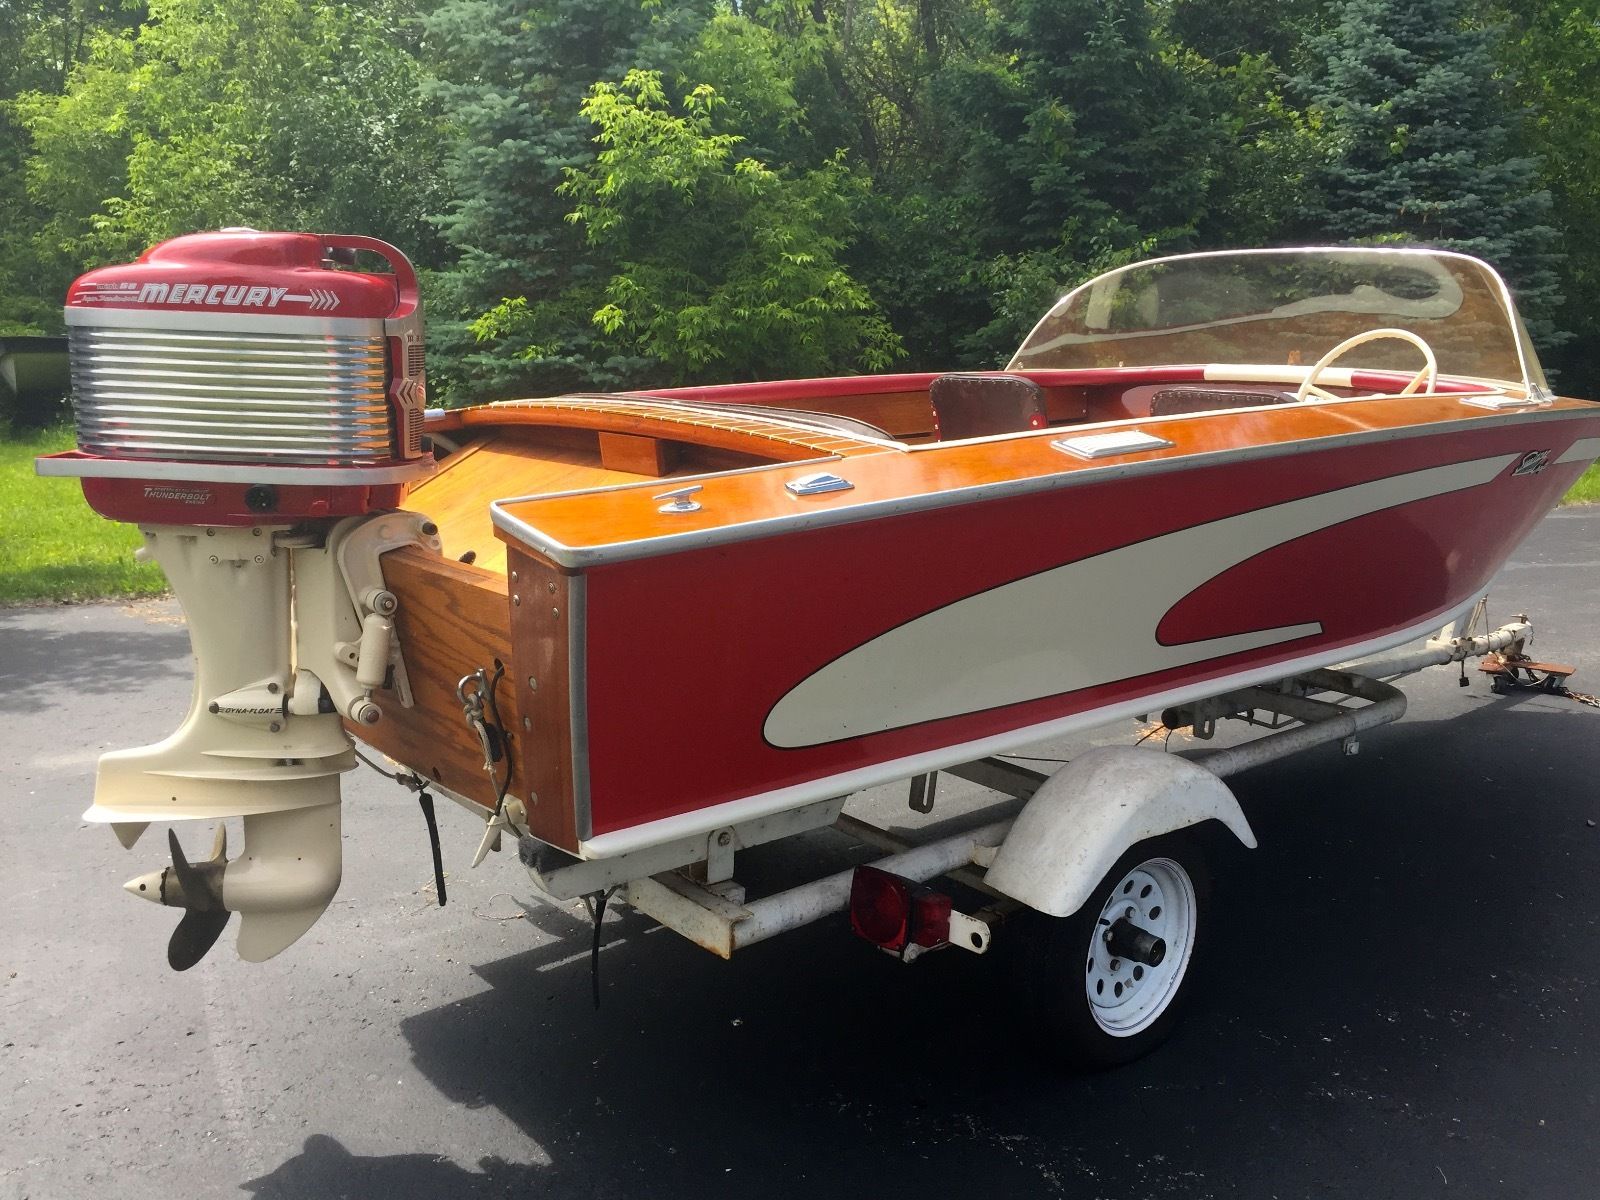 Switzer Craft Combo 1958 For Sale For 5500 Boats From 0679